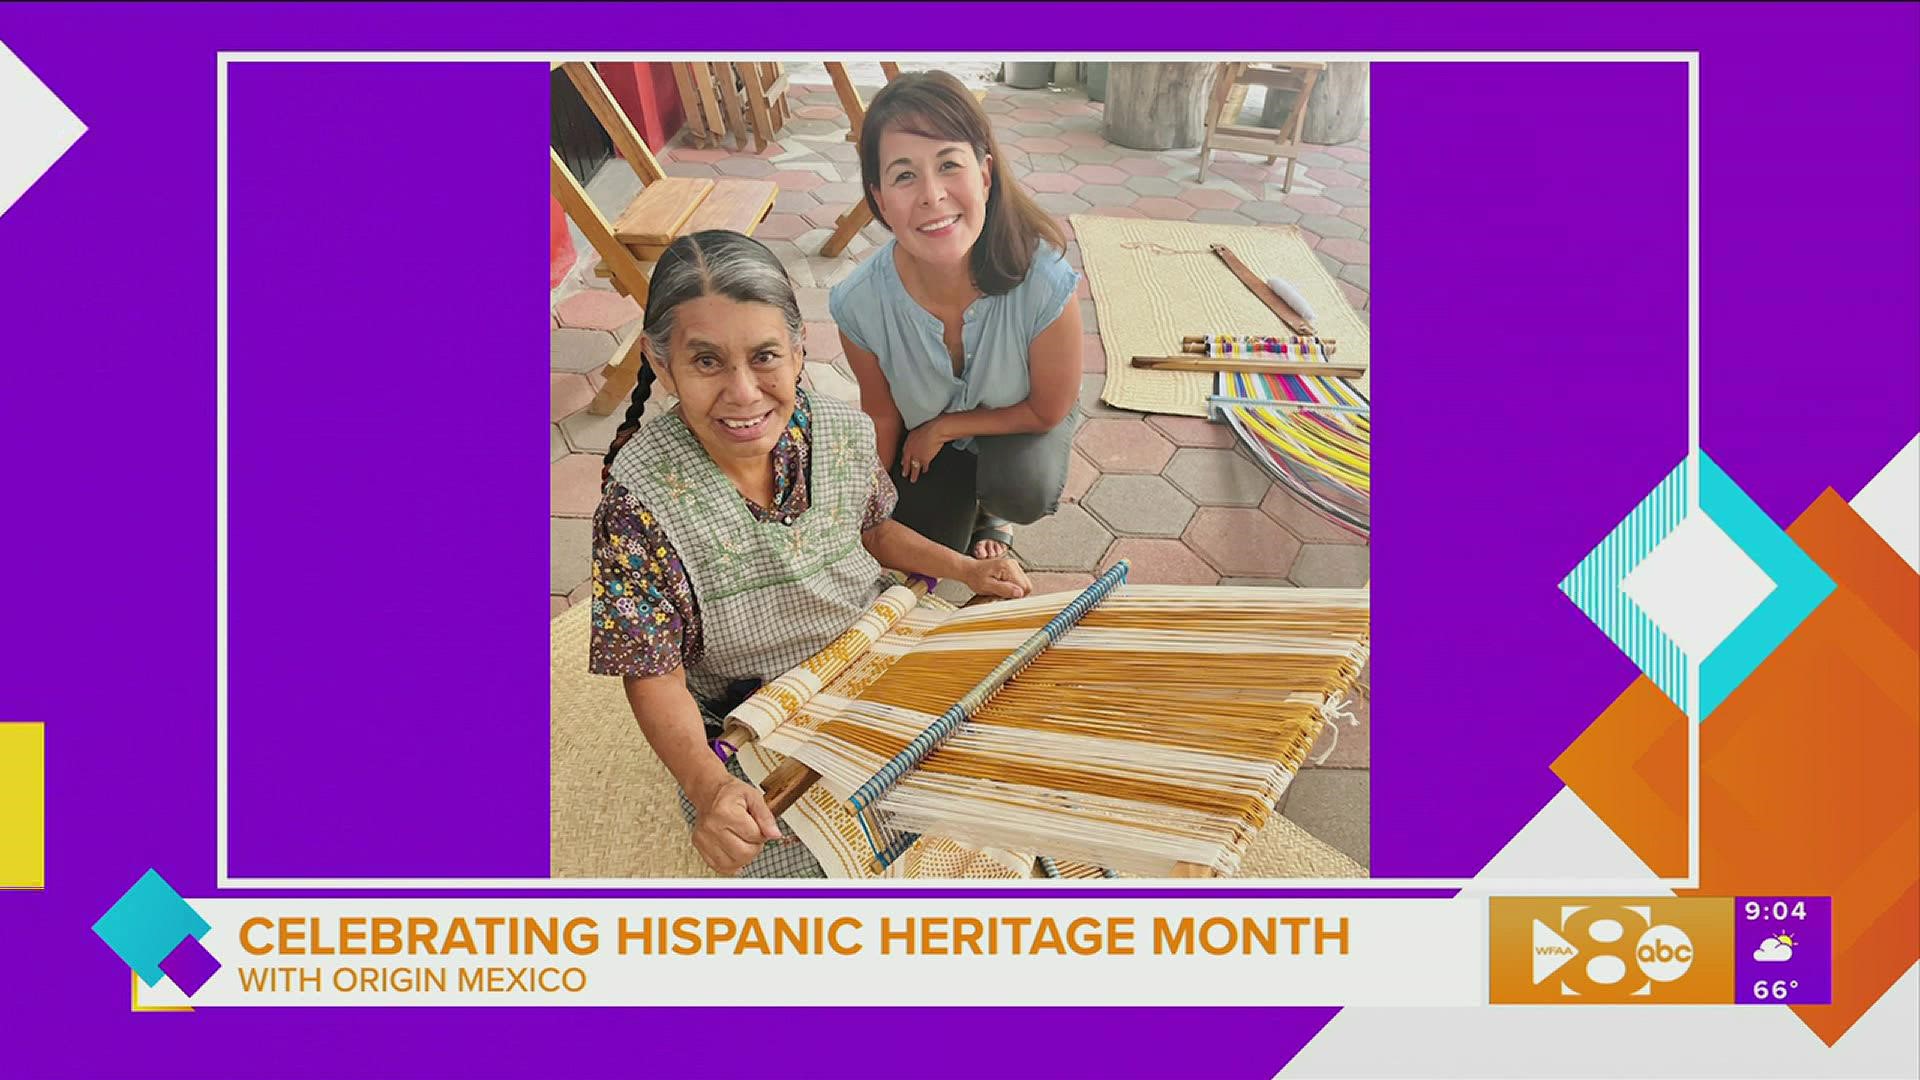 We're kicking off Hispanic Heritage Month by celebrating traditions and culture through wearable art, all while giving back to the artisan communities in Mexico.